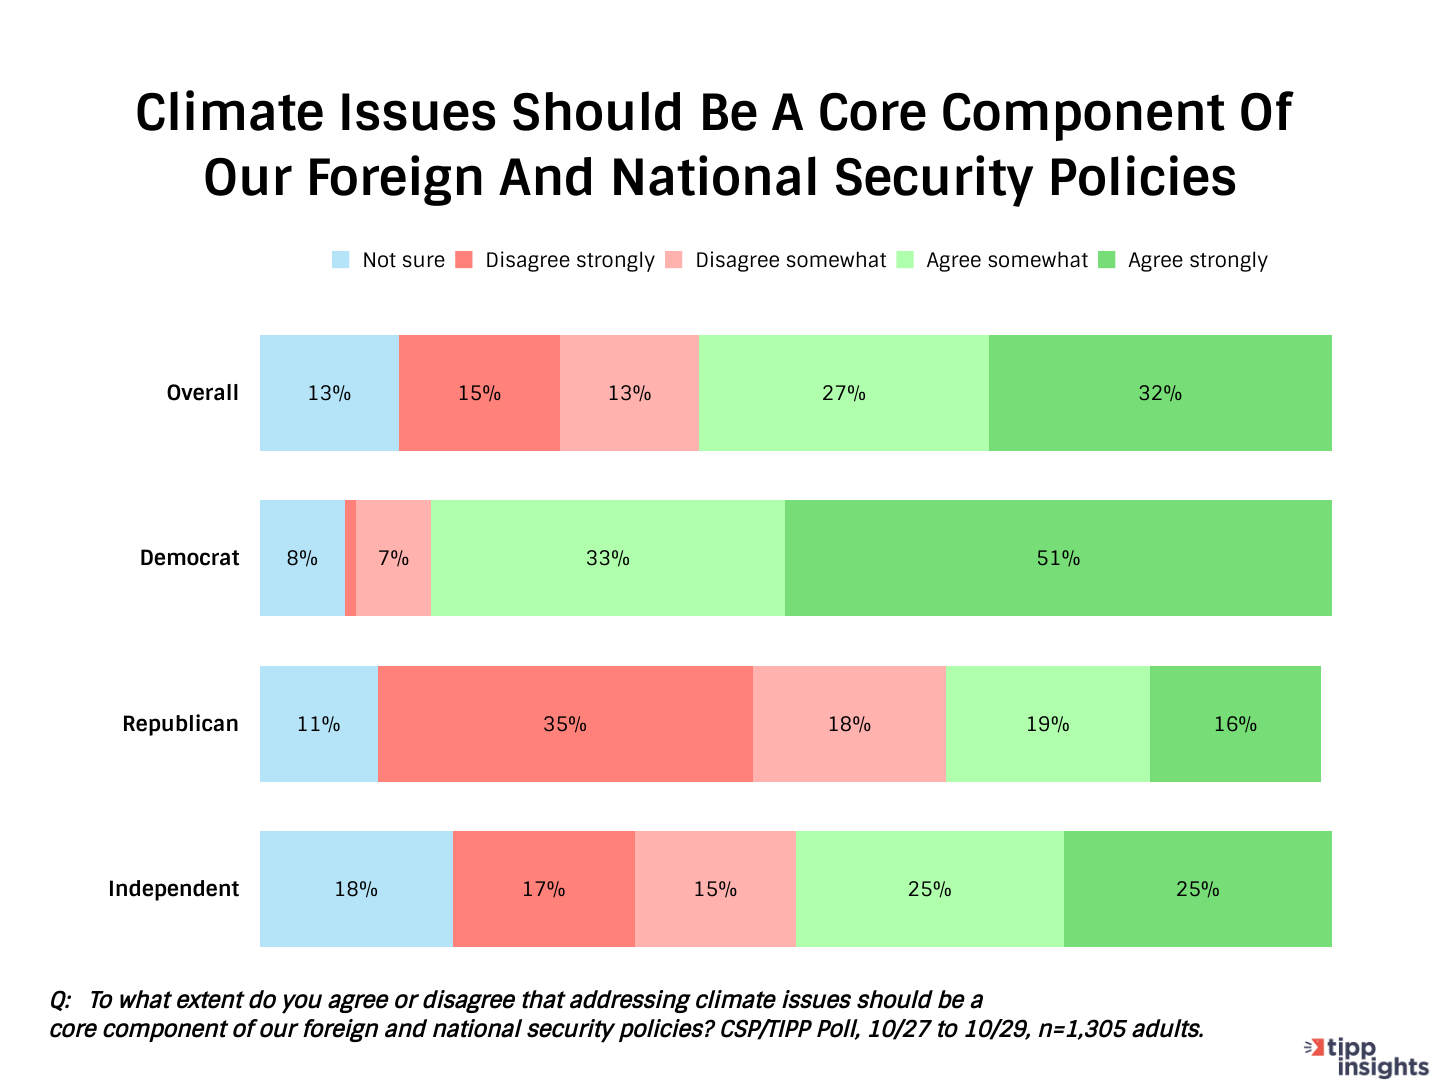 CSP/TIPP Poll: Should Climate issues be a core component of U.S. foreign and national security policies